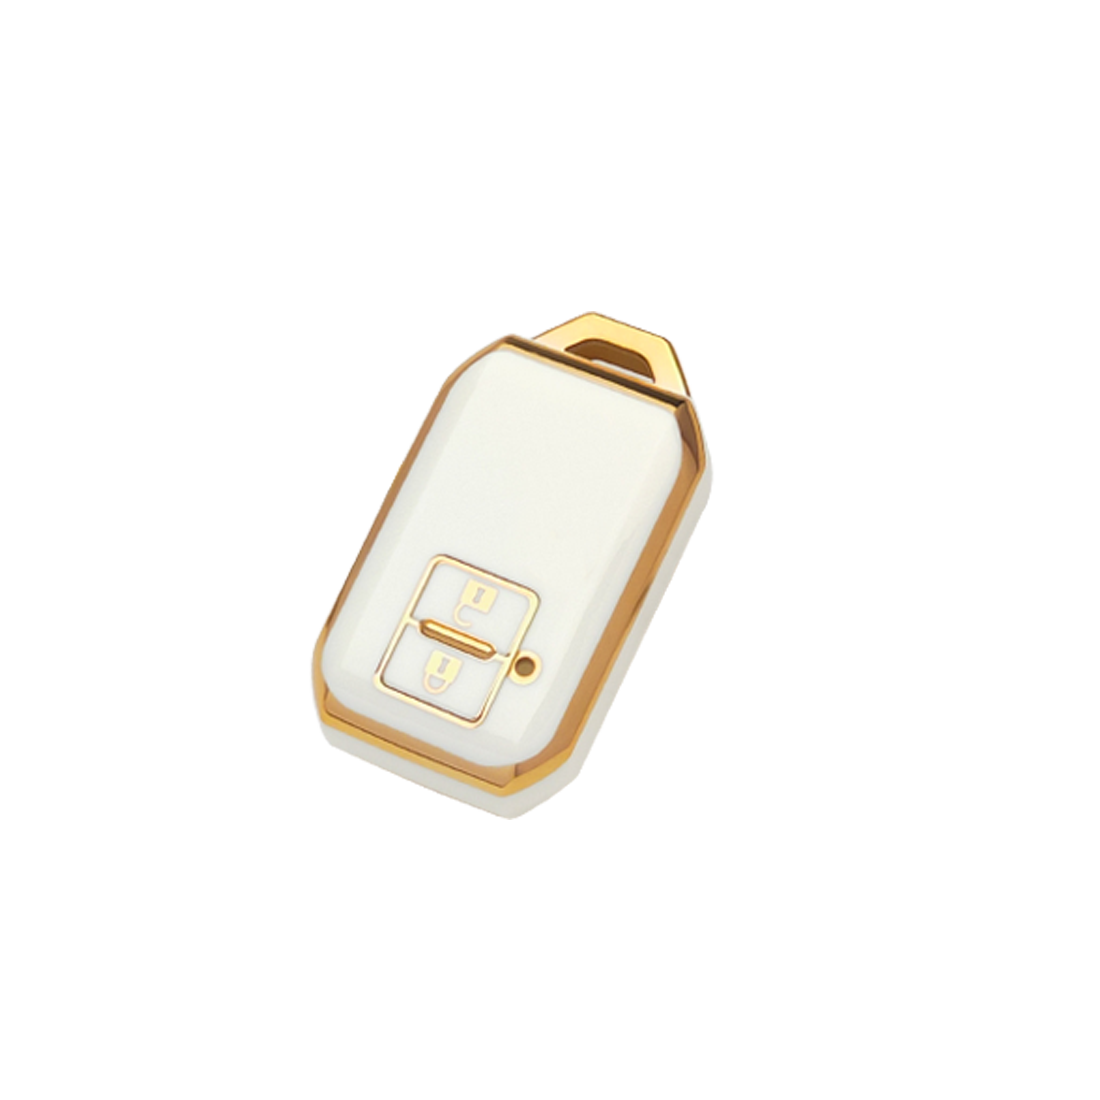 Acto TPU Gold Series Car Key Cover With TPU Gold Key Chain For Suzuki New Swift